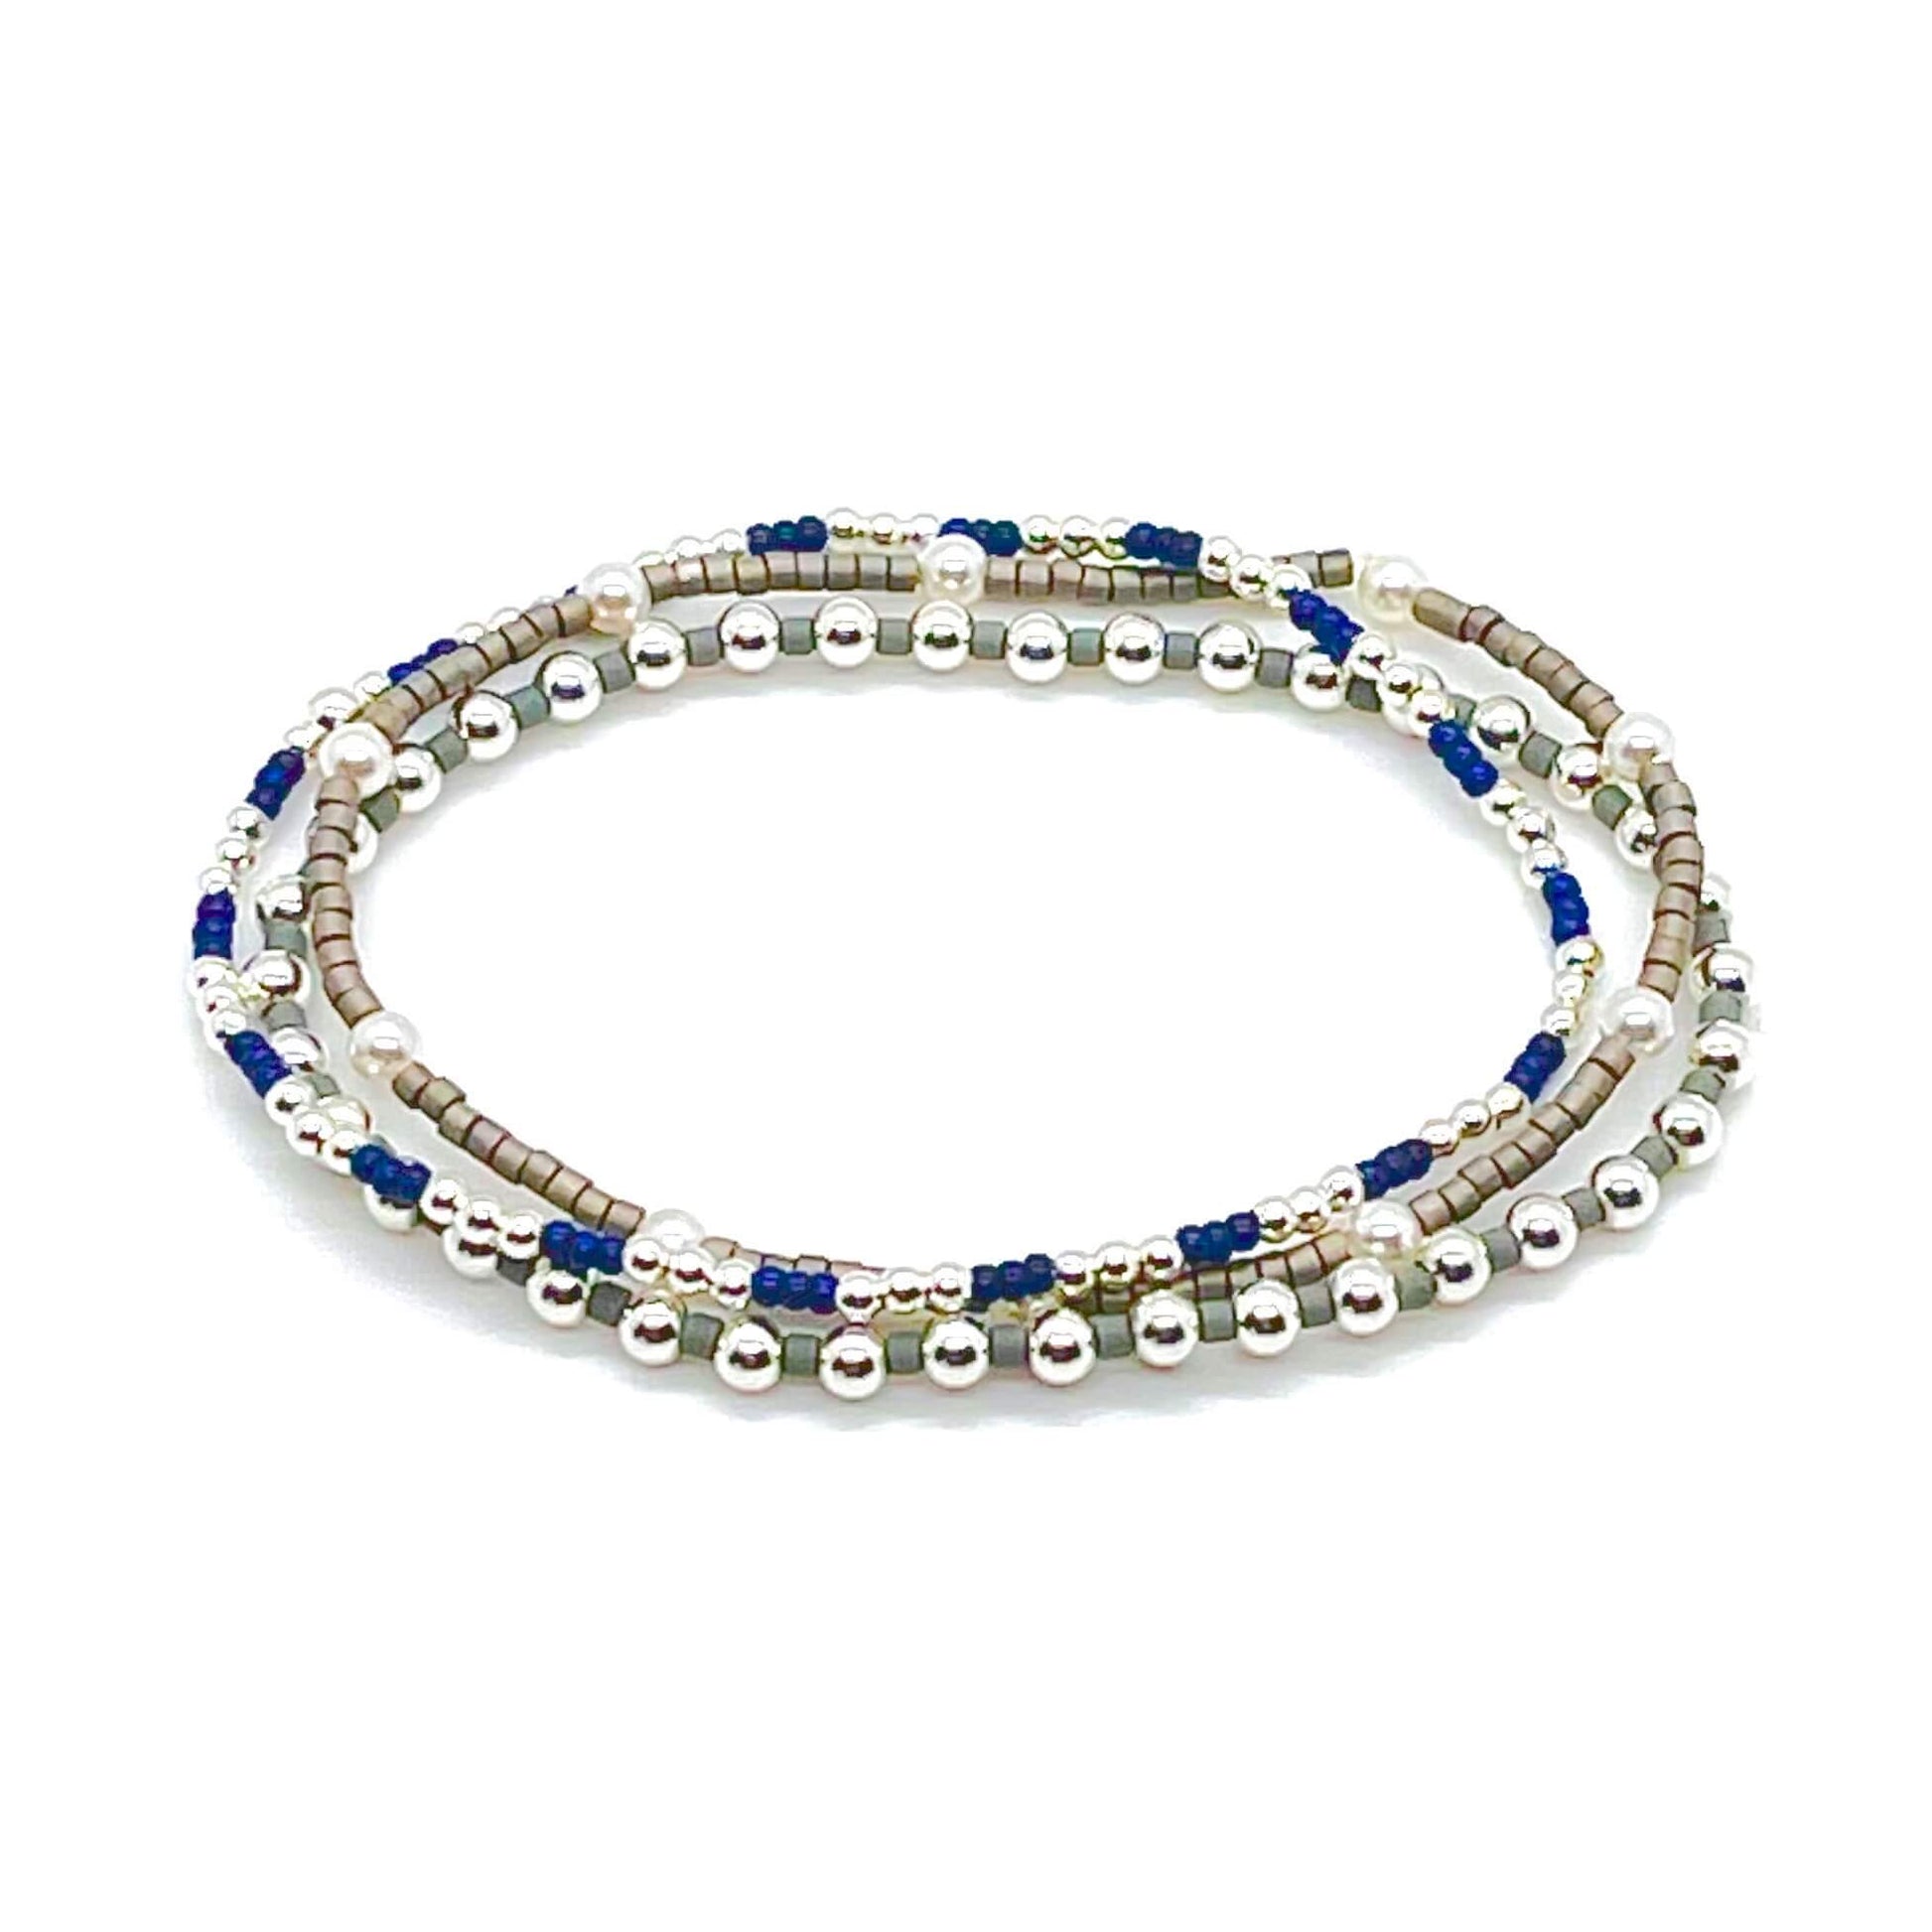 Silver beaded stretch bracelet trio with blue, grey, and pearl beads.